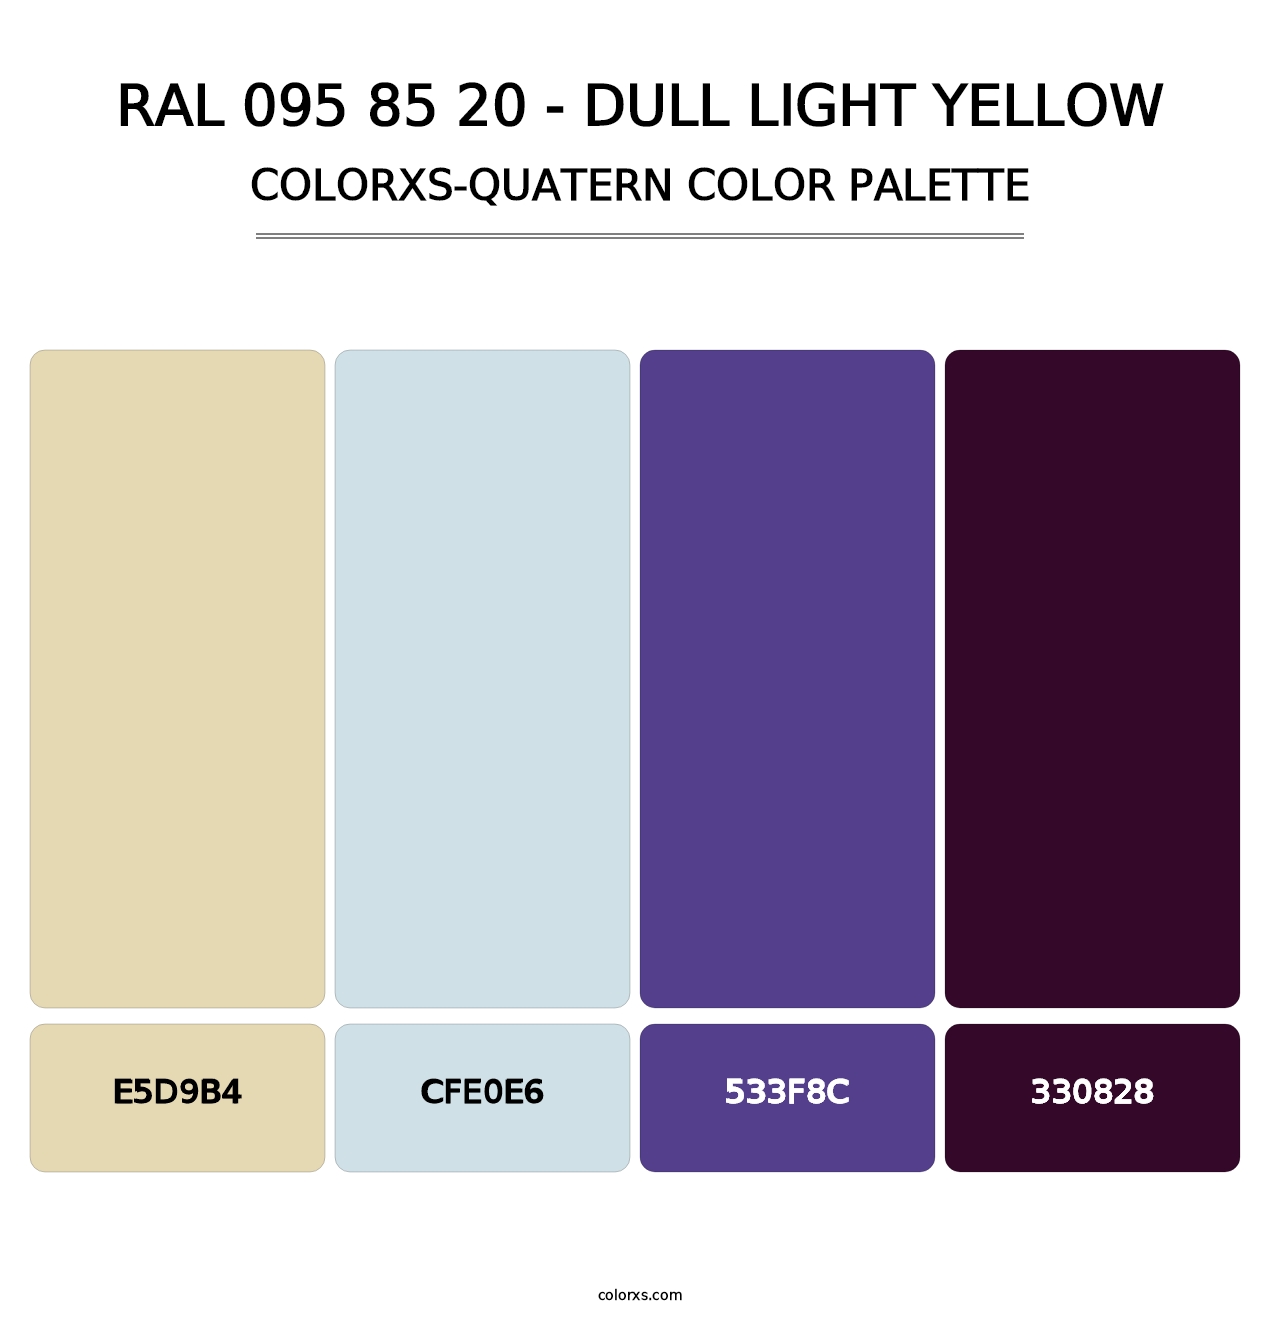 RAL 095 85 20 - Dull Light Yellow - Colorxs Quatern Palette